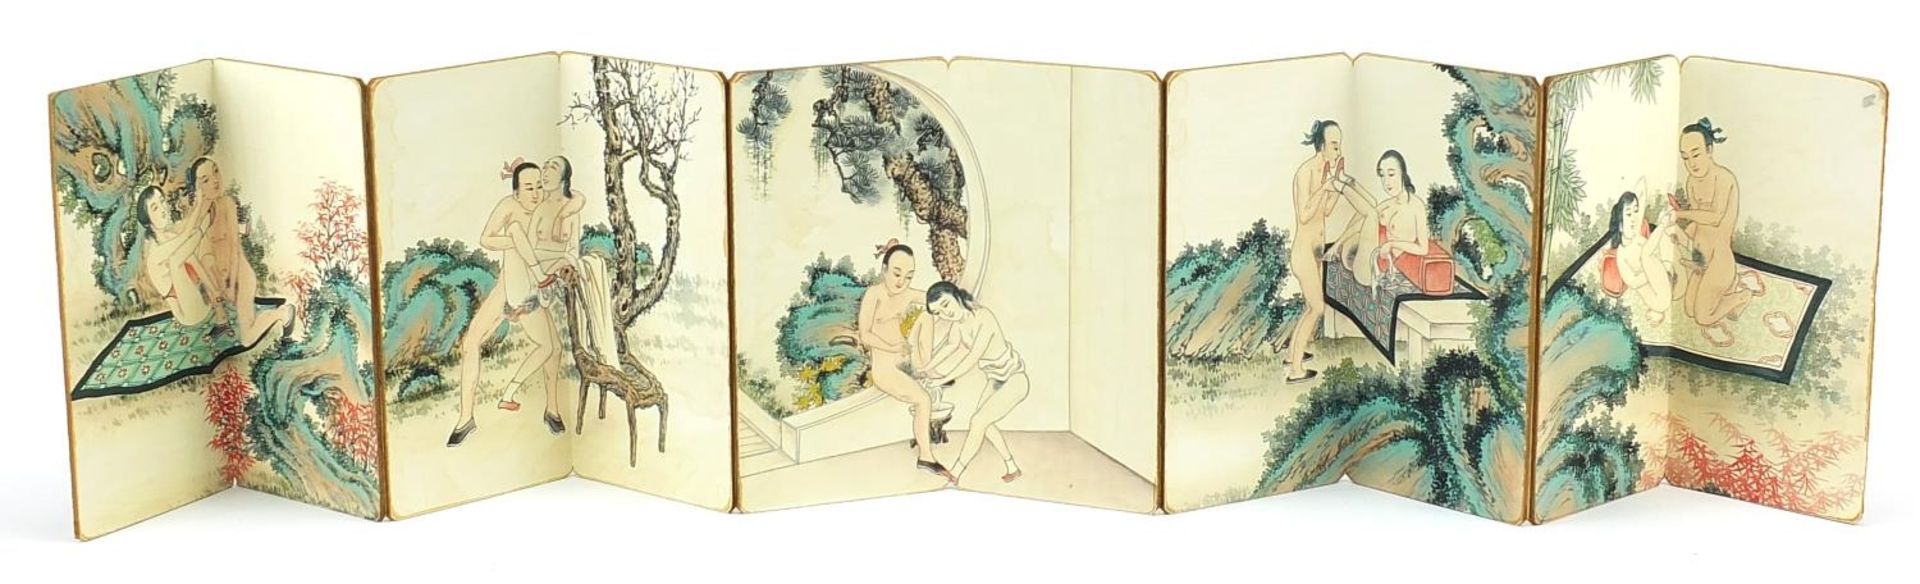 Chinese folding book depicting erotic scenes, 18cm high - Image 2 of 6